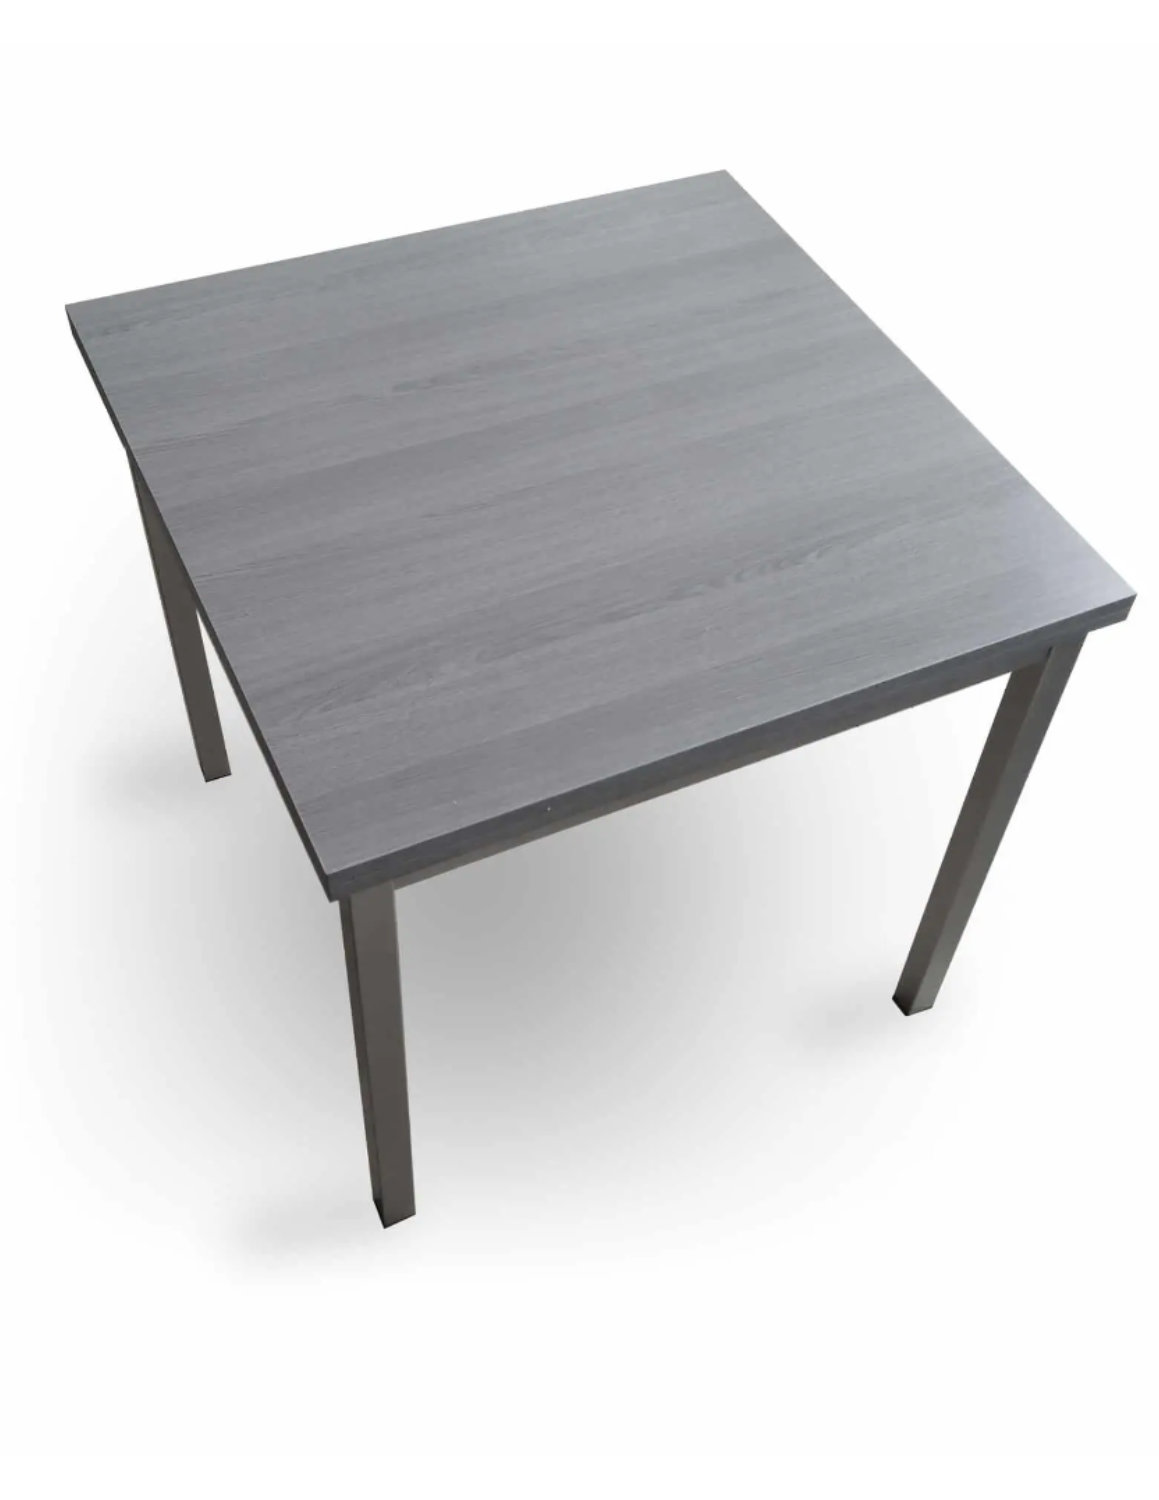 https://expandfurniture.com/wp-content/uploads/2016/06/Echo-Grey-Wood-table-doubles-in-size-grey-wood-with-silver-legs.jpg